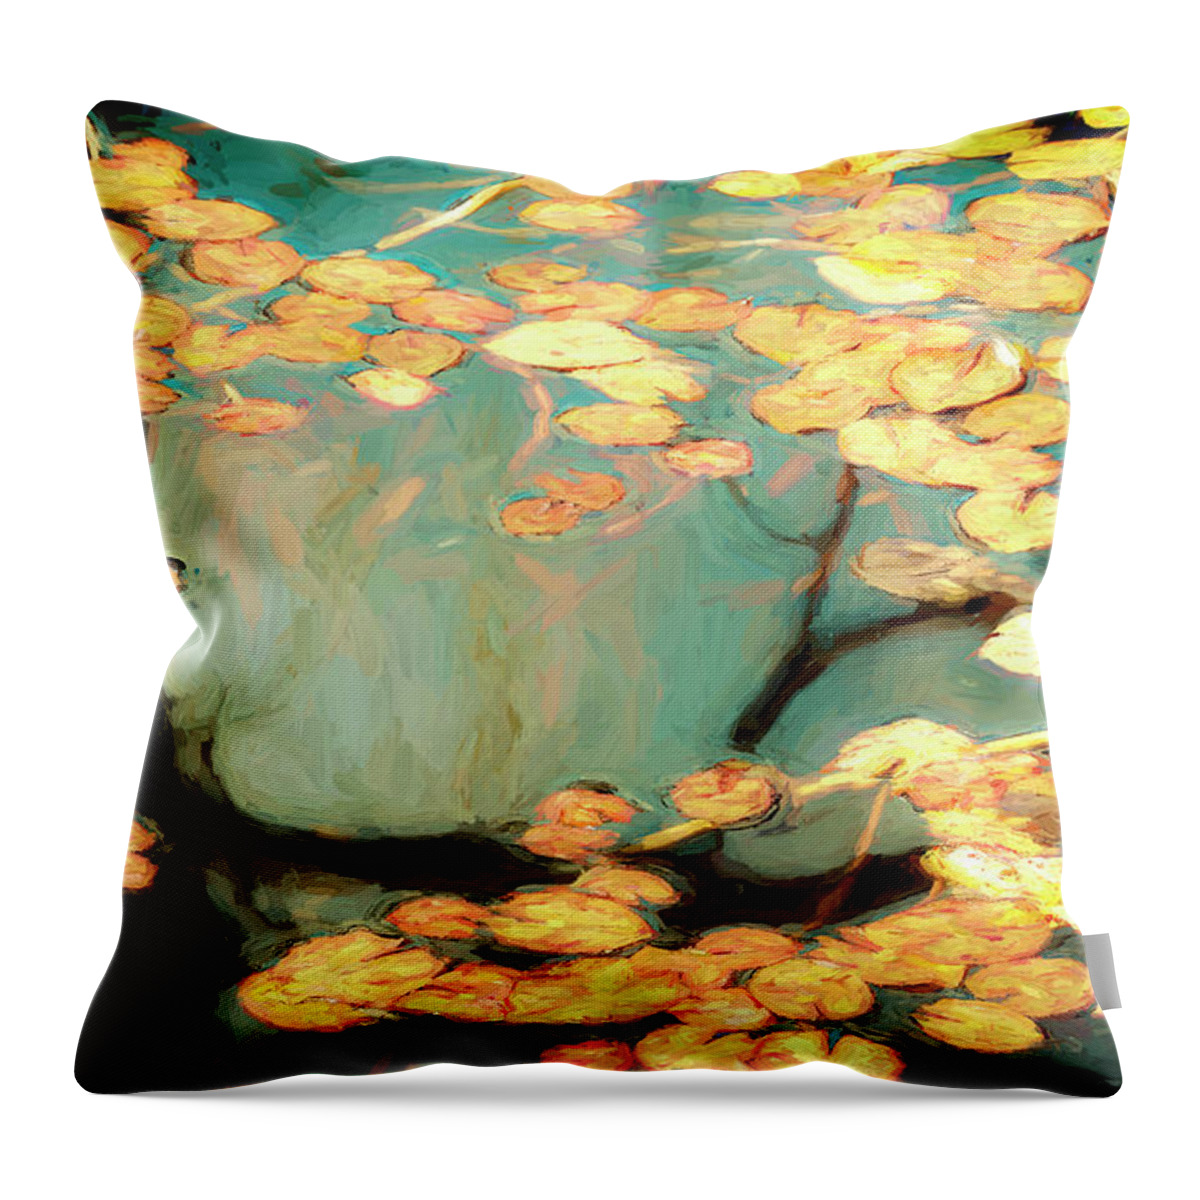 Lilies Throw Pillow featuring the digital art Water Lilies by Wayne Sherriff